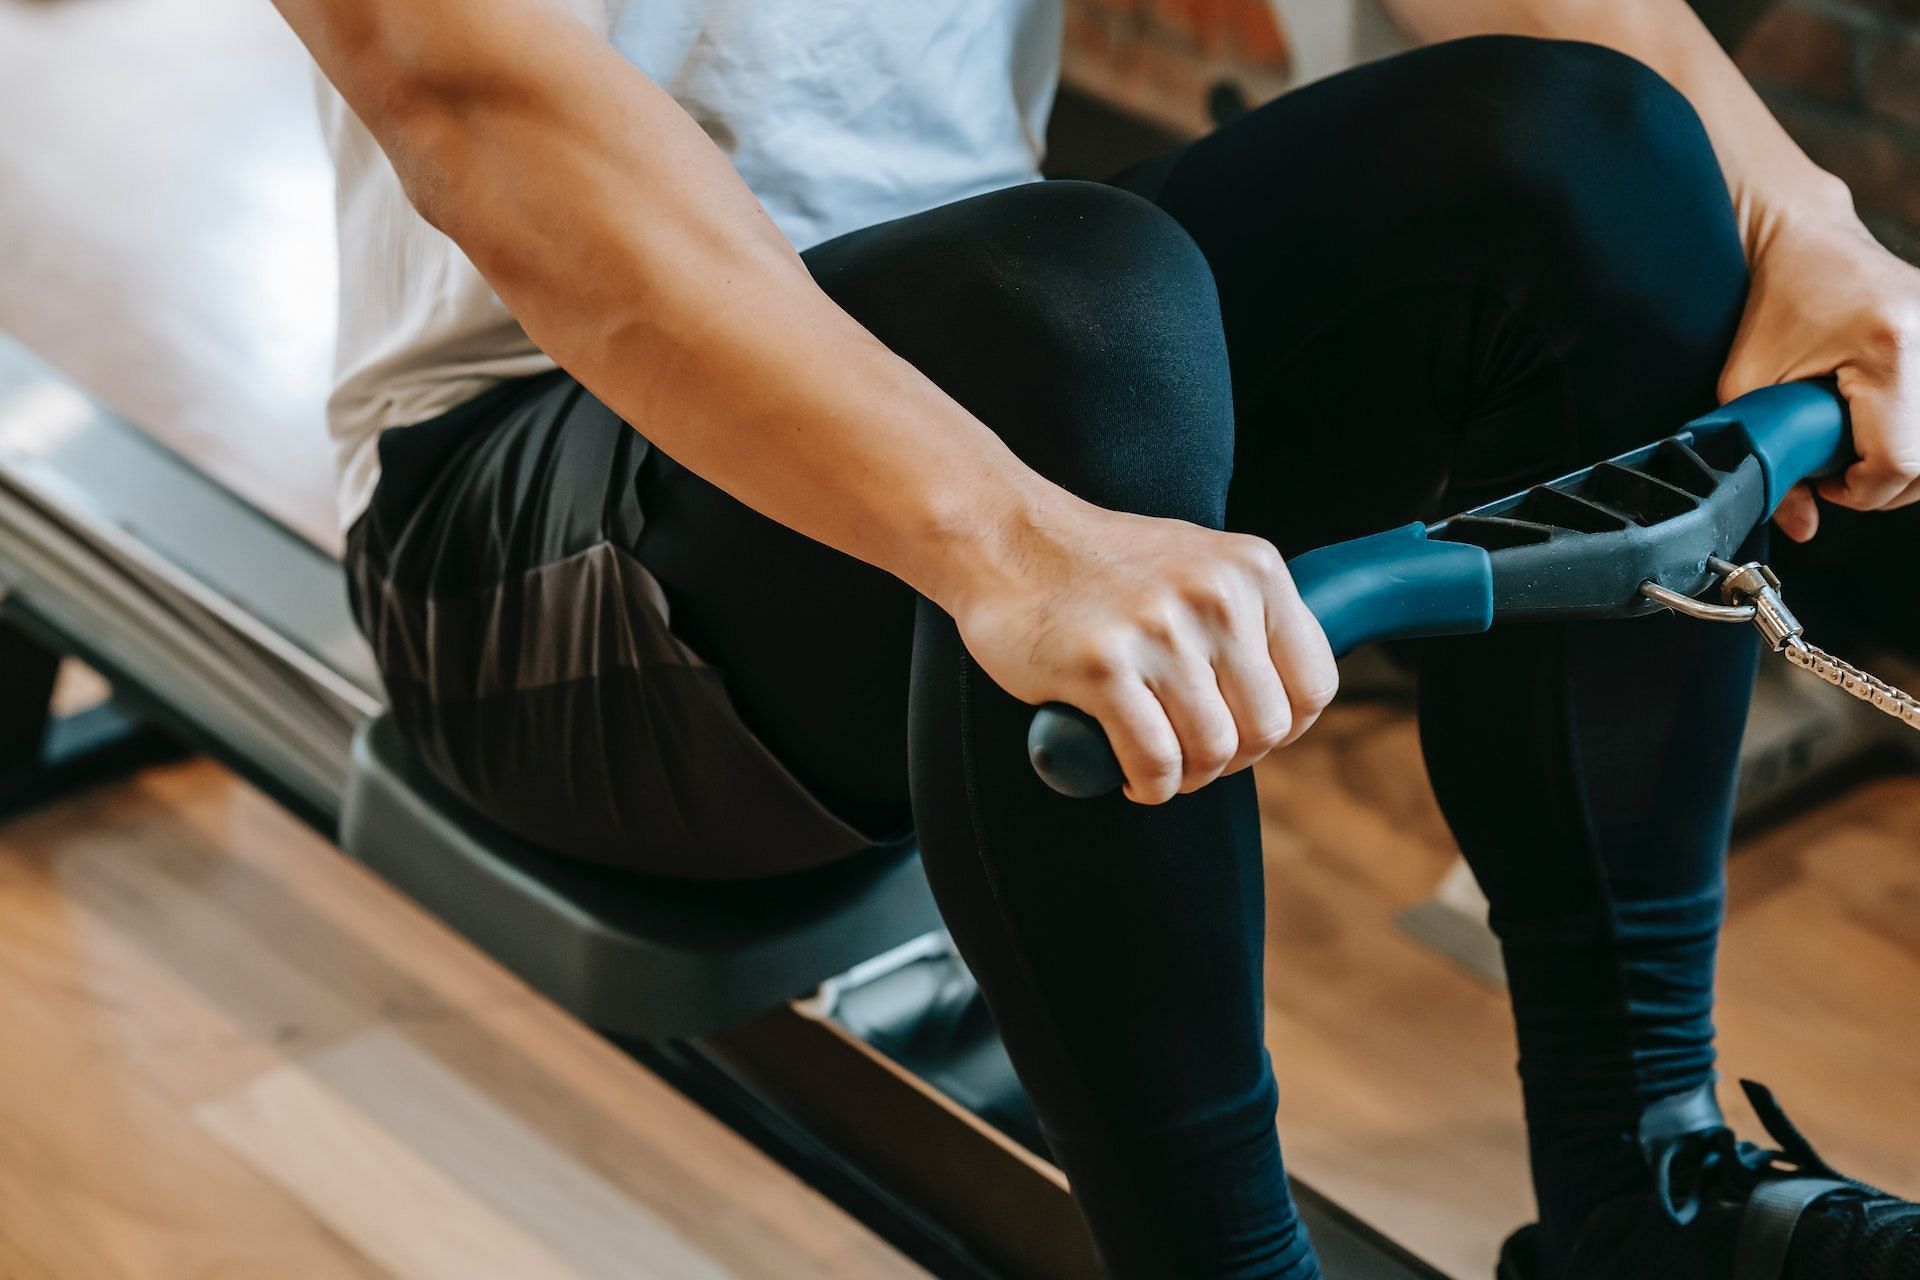 Low seated row is an excellent compound exercise. (Photo via Pexels/Andres Ayrton)